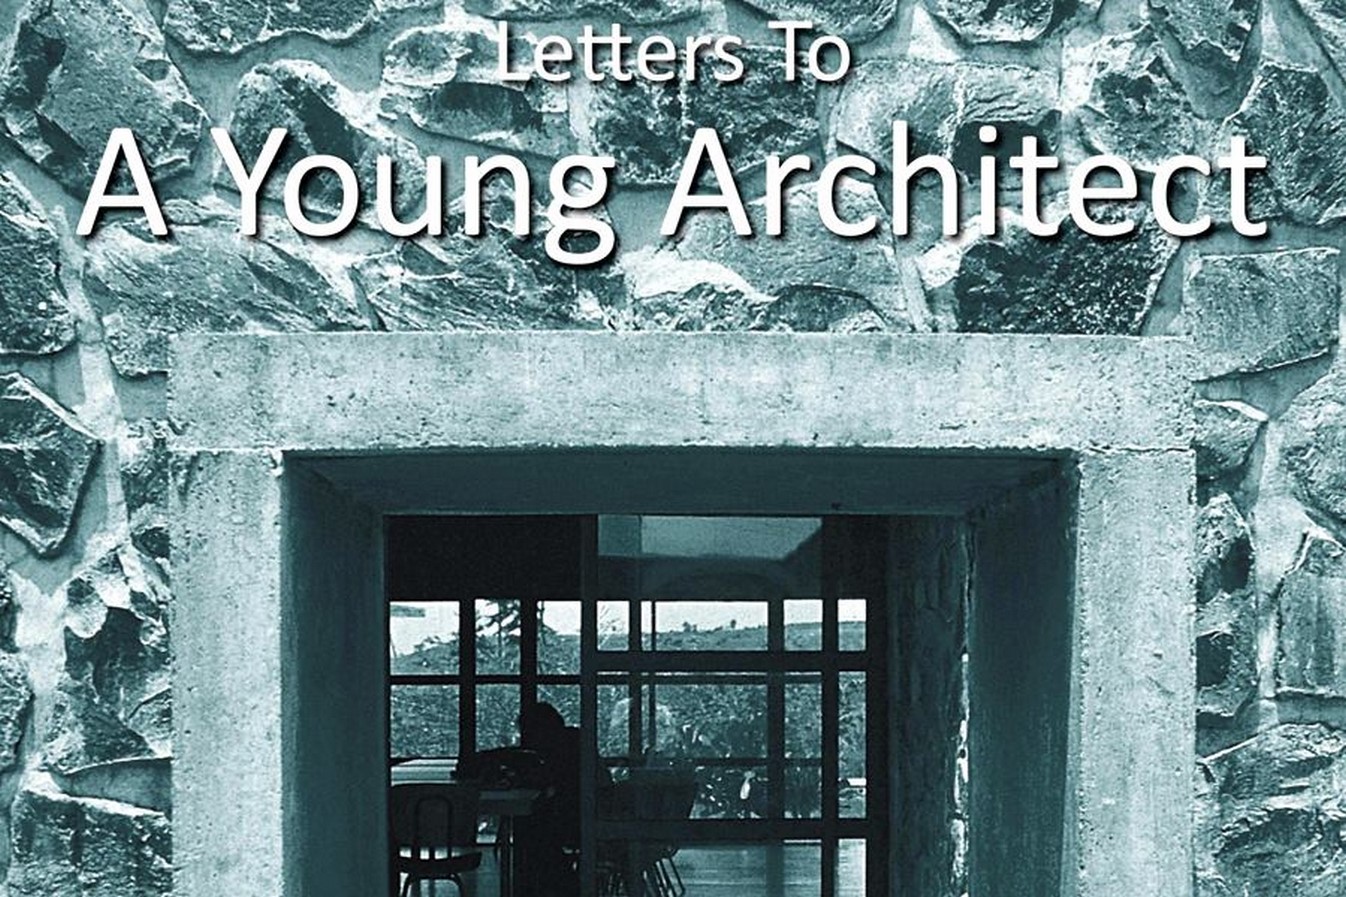 Why you should read “Letters to a young architect” - Sheet1